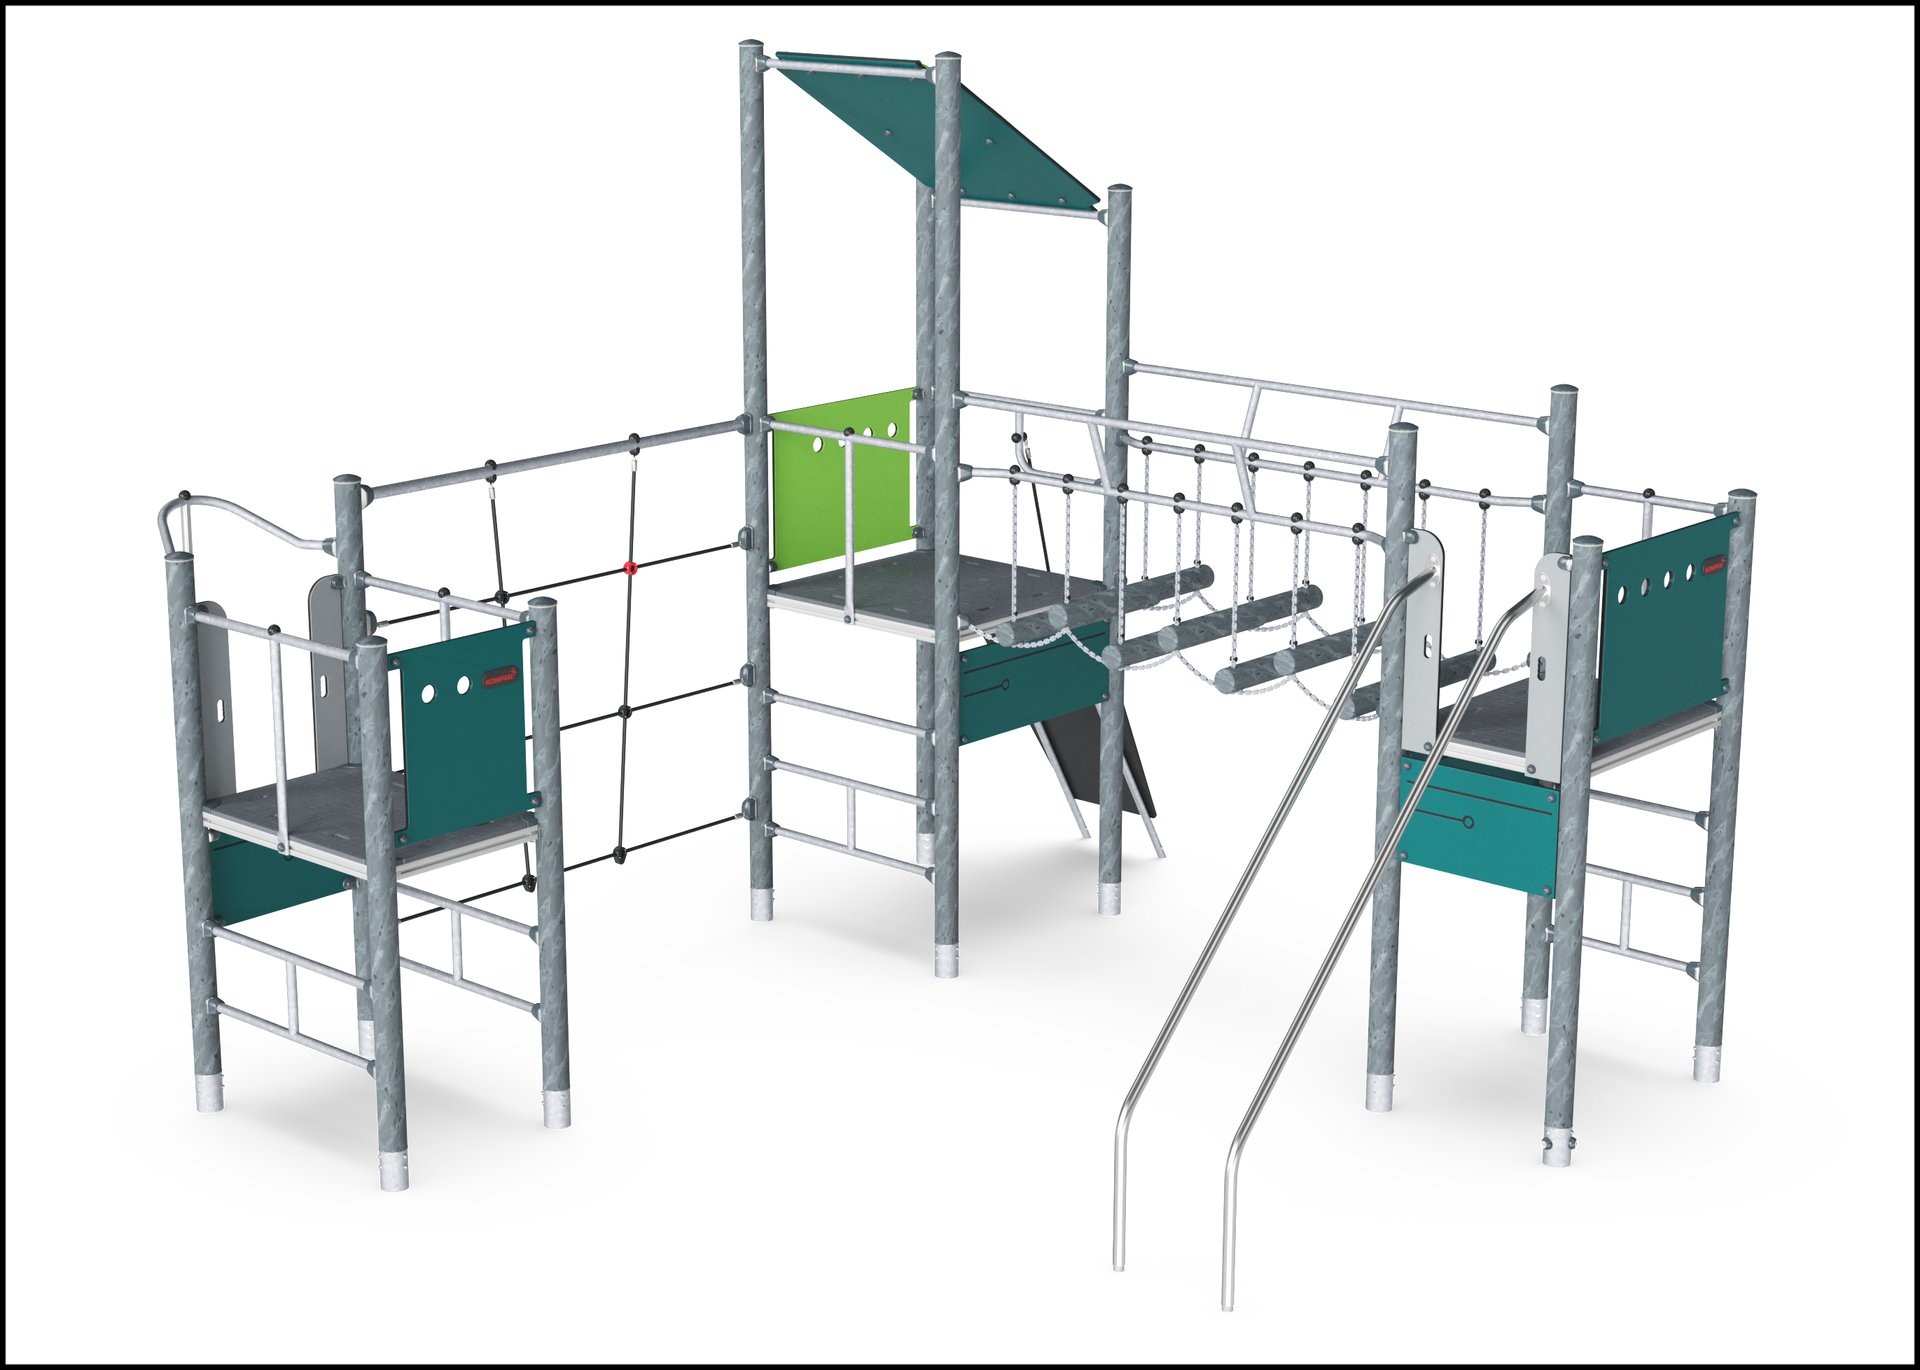 Play system greenline